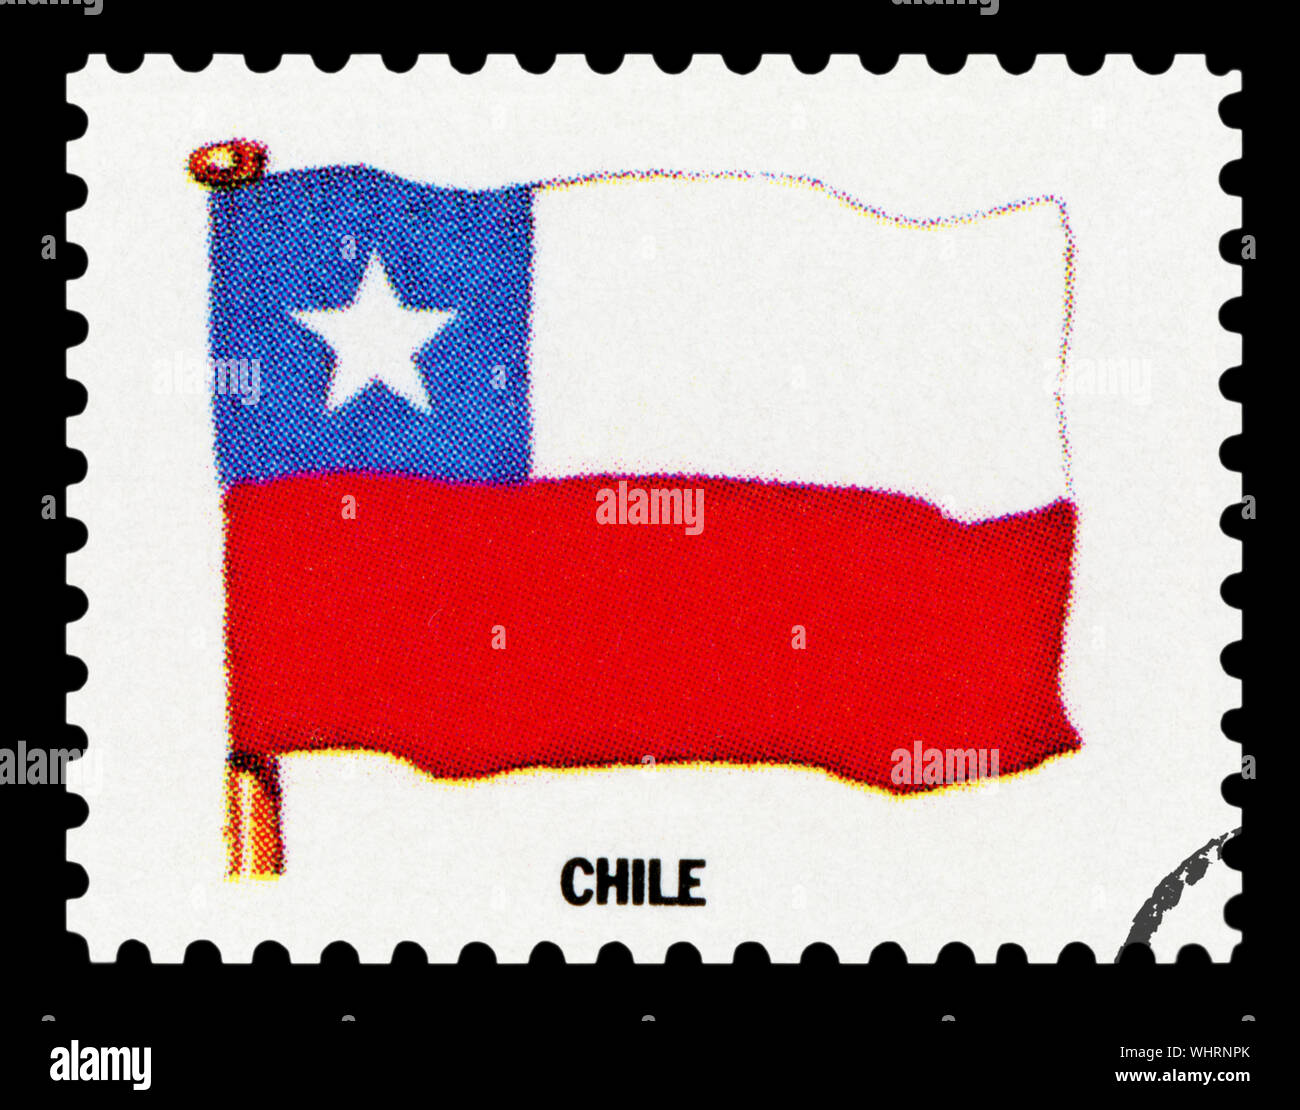 CHILE FLAG - Postage Stamp isolated on black background. Stock Photo